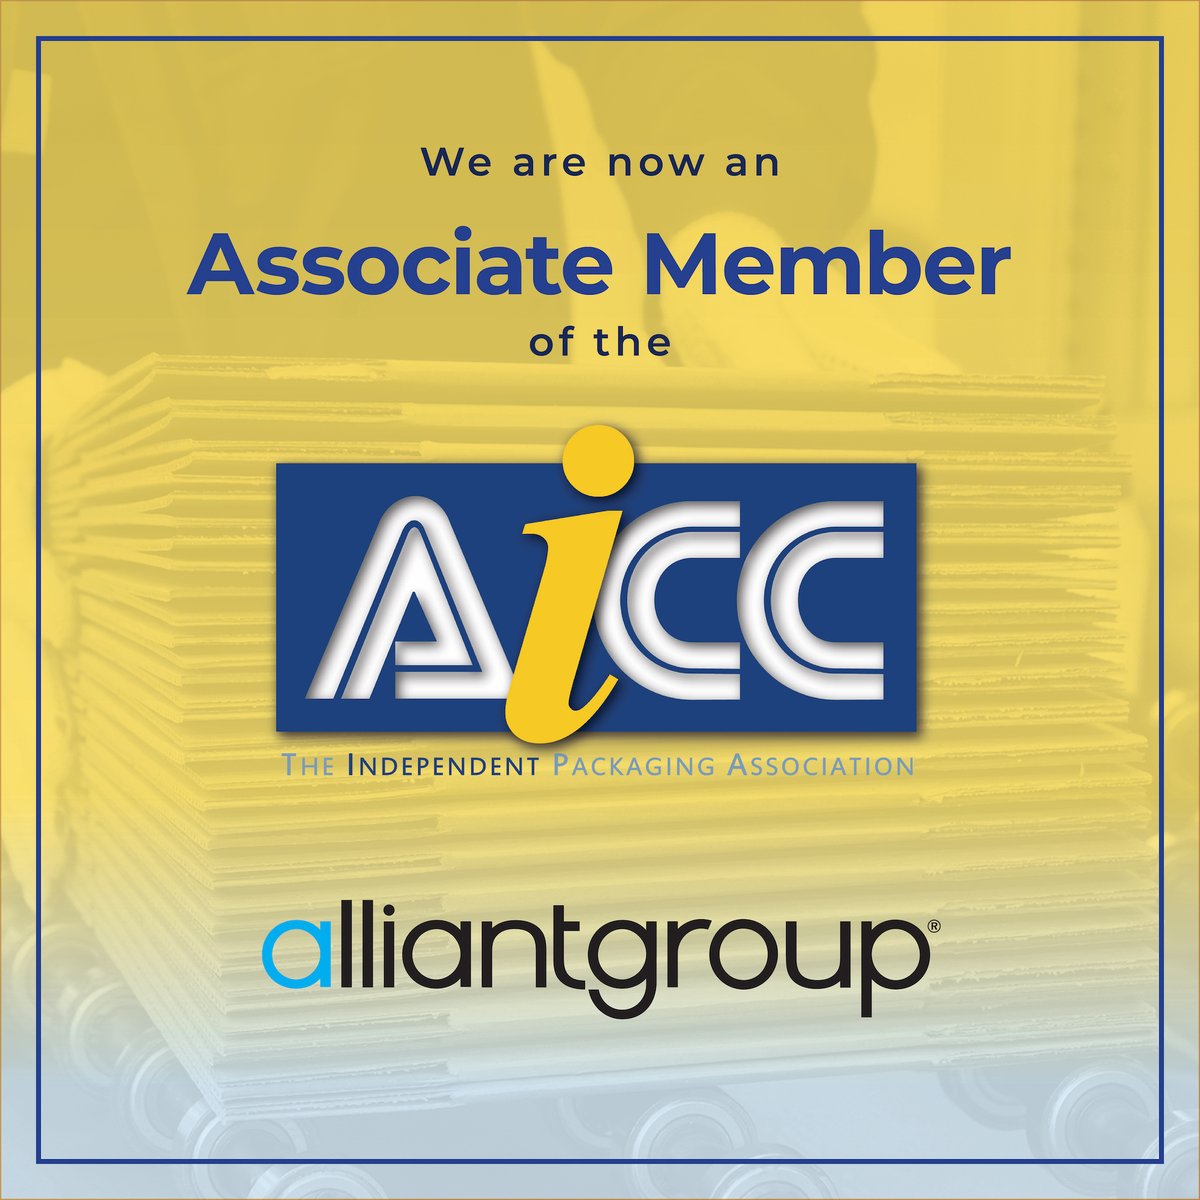 alliantgroup is excited to announce our new status as Associate Members of AICC, The Independent Packaging Association! We have been able to help their membership receive extensive refunds through Credits & Incentives for activities they do everyday. @FindaBoxMaker